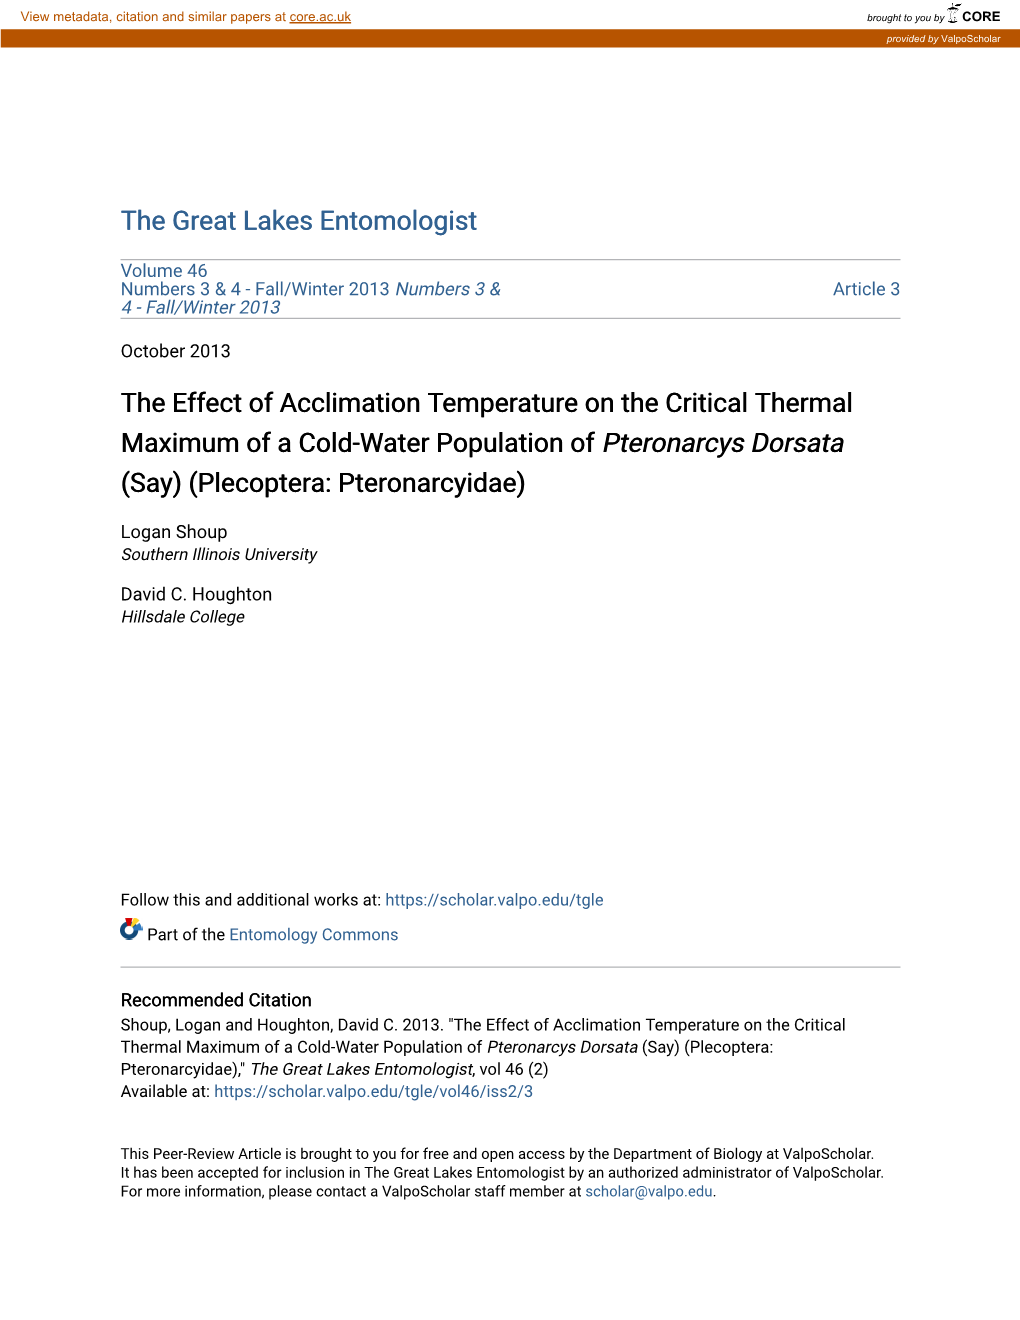 The Effect of Acclimation Temperature on the Critical Thermal Maximum of a Cold-Water Population of Pteronarcys Dorsata (Say) (Plecoptera: Pteronarcyidae)